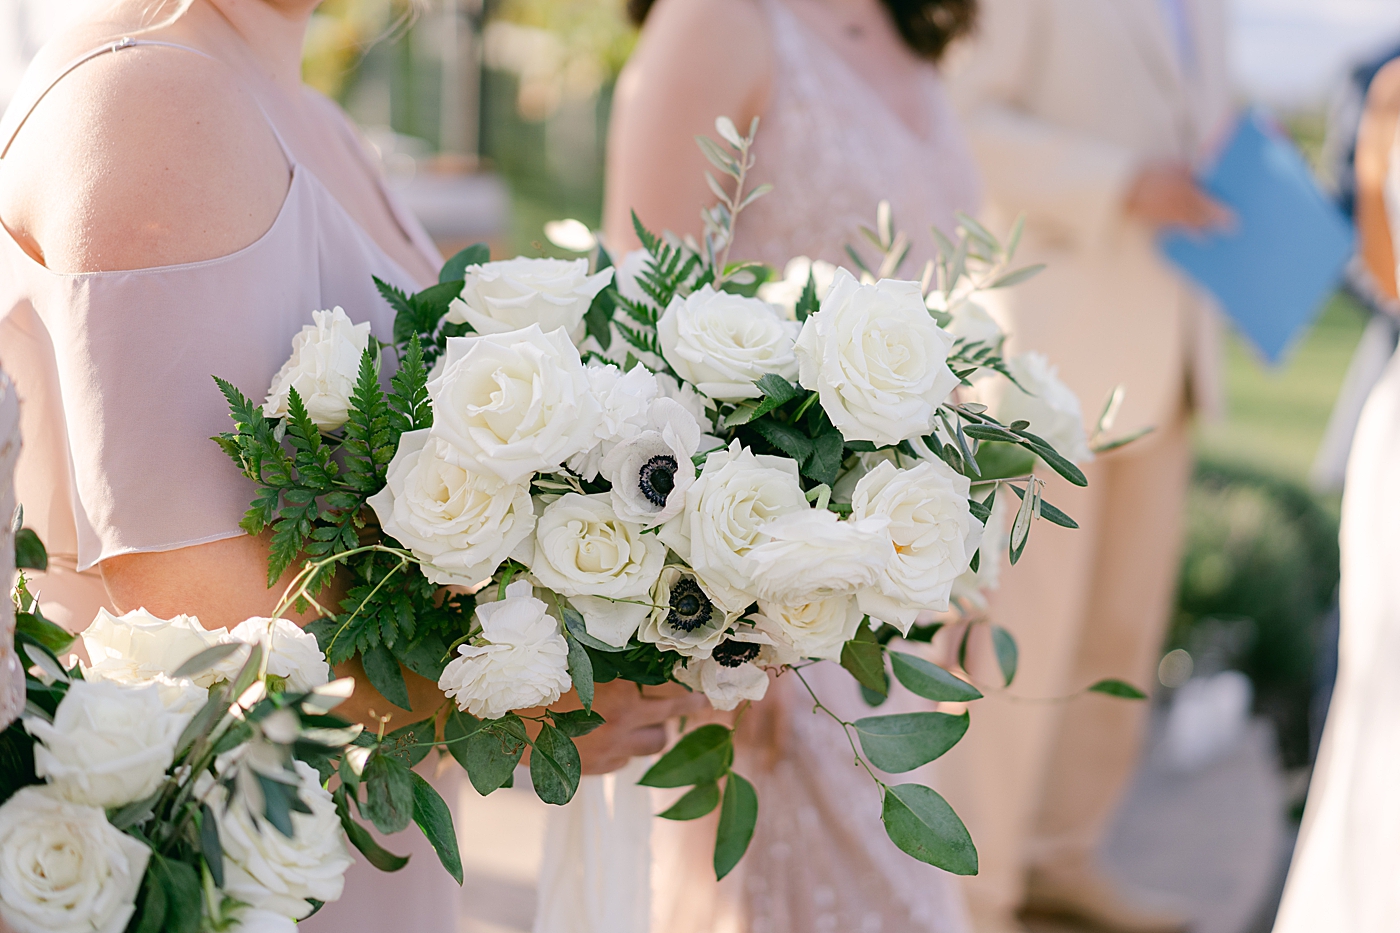 Bridal bouquet at Folino estate wedding | Photo by Hope Helmuth Photography